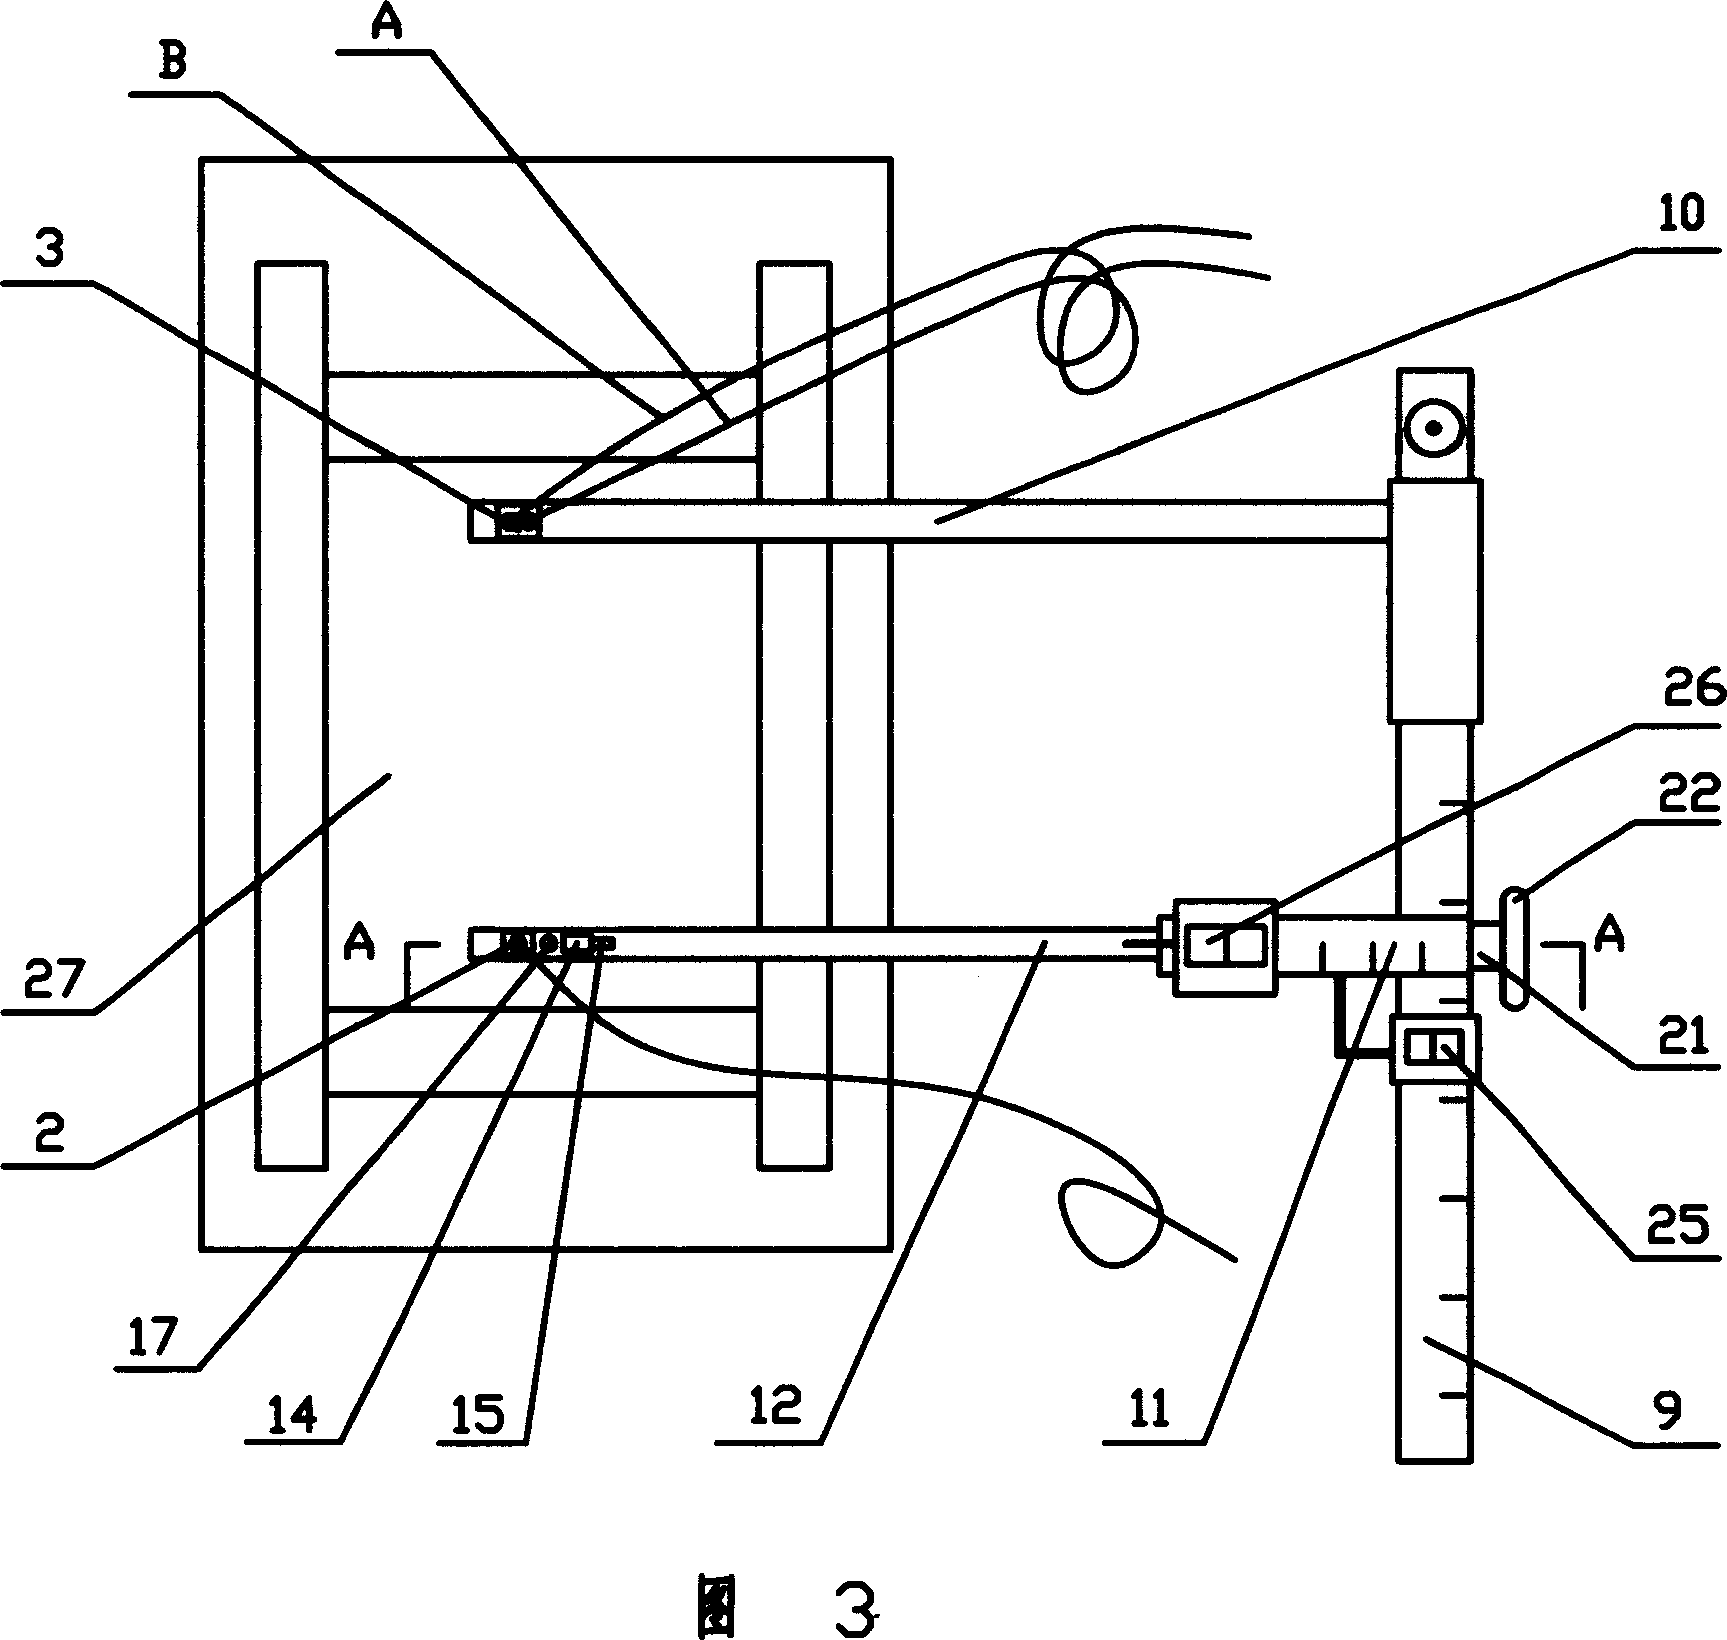 Transvenous optical charactr nondestructive testing method and apparatus therefor